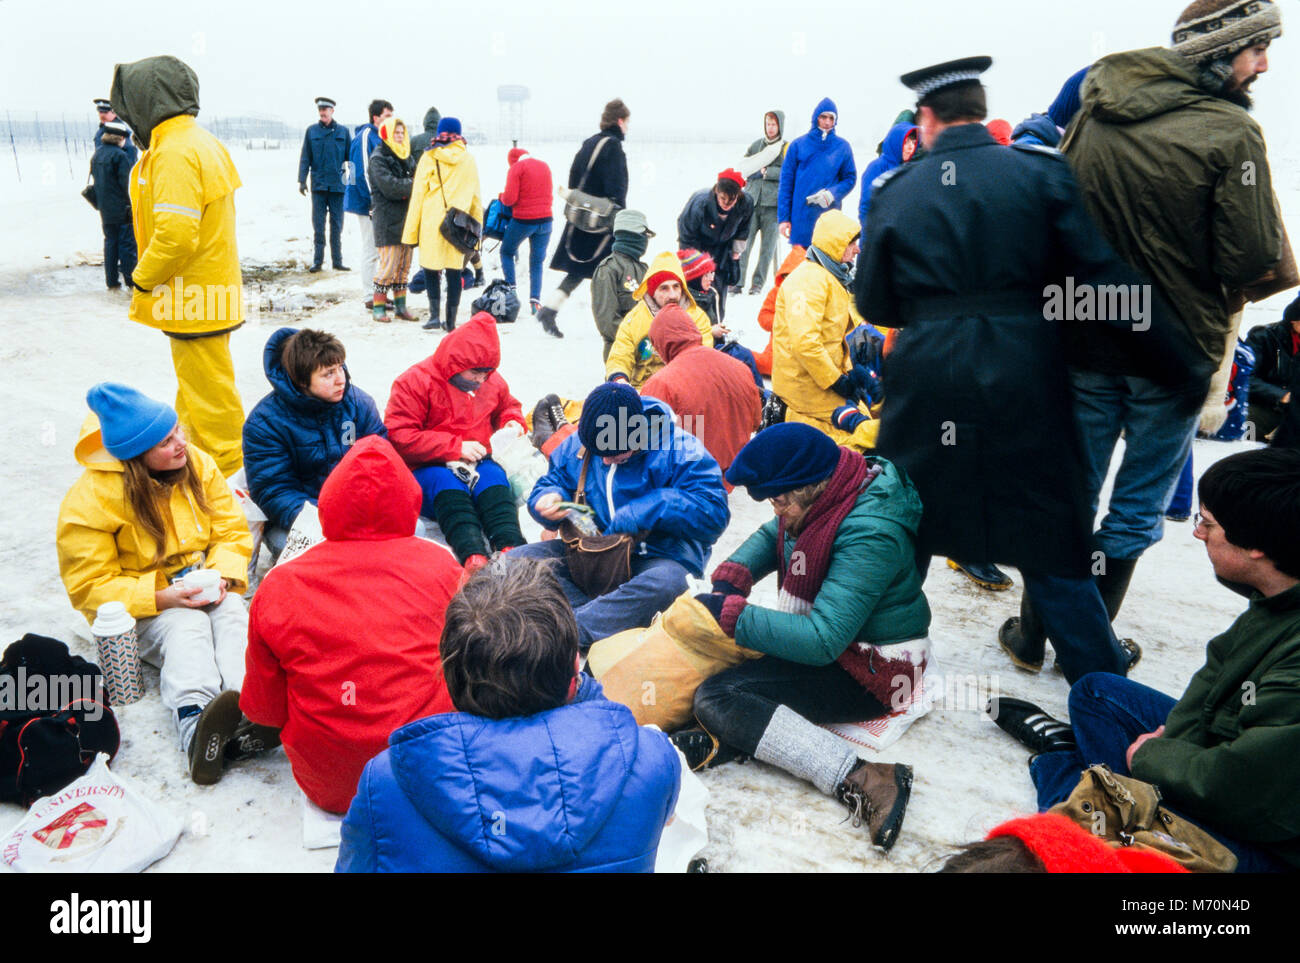 Protesters sitting in the snow at the Anti cruise missile demonstration at the Molesworth missile base on 2nd February 1986 in snowy conditions. Cambridgeshire, England, UK, archival photograph, Stock Photo